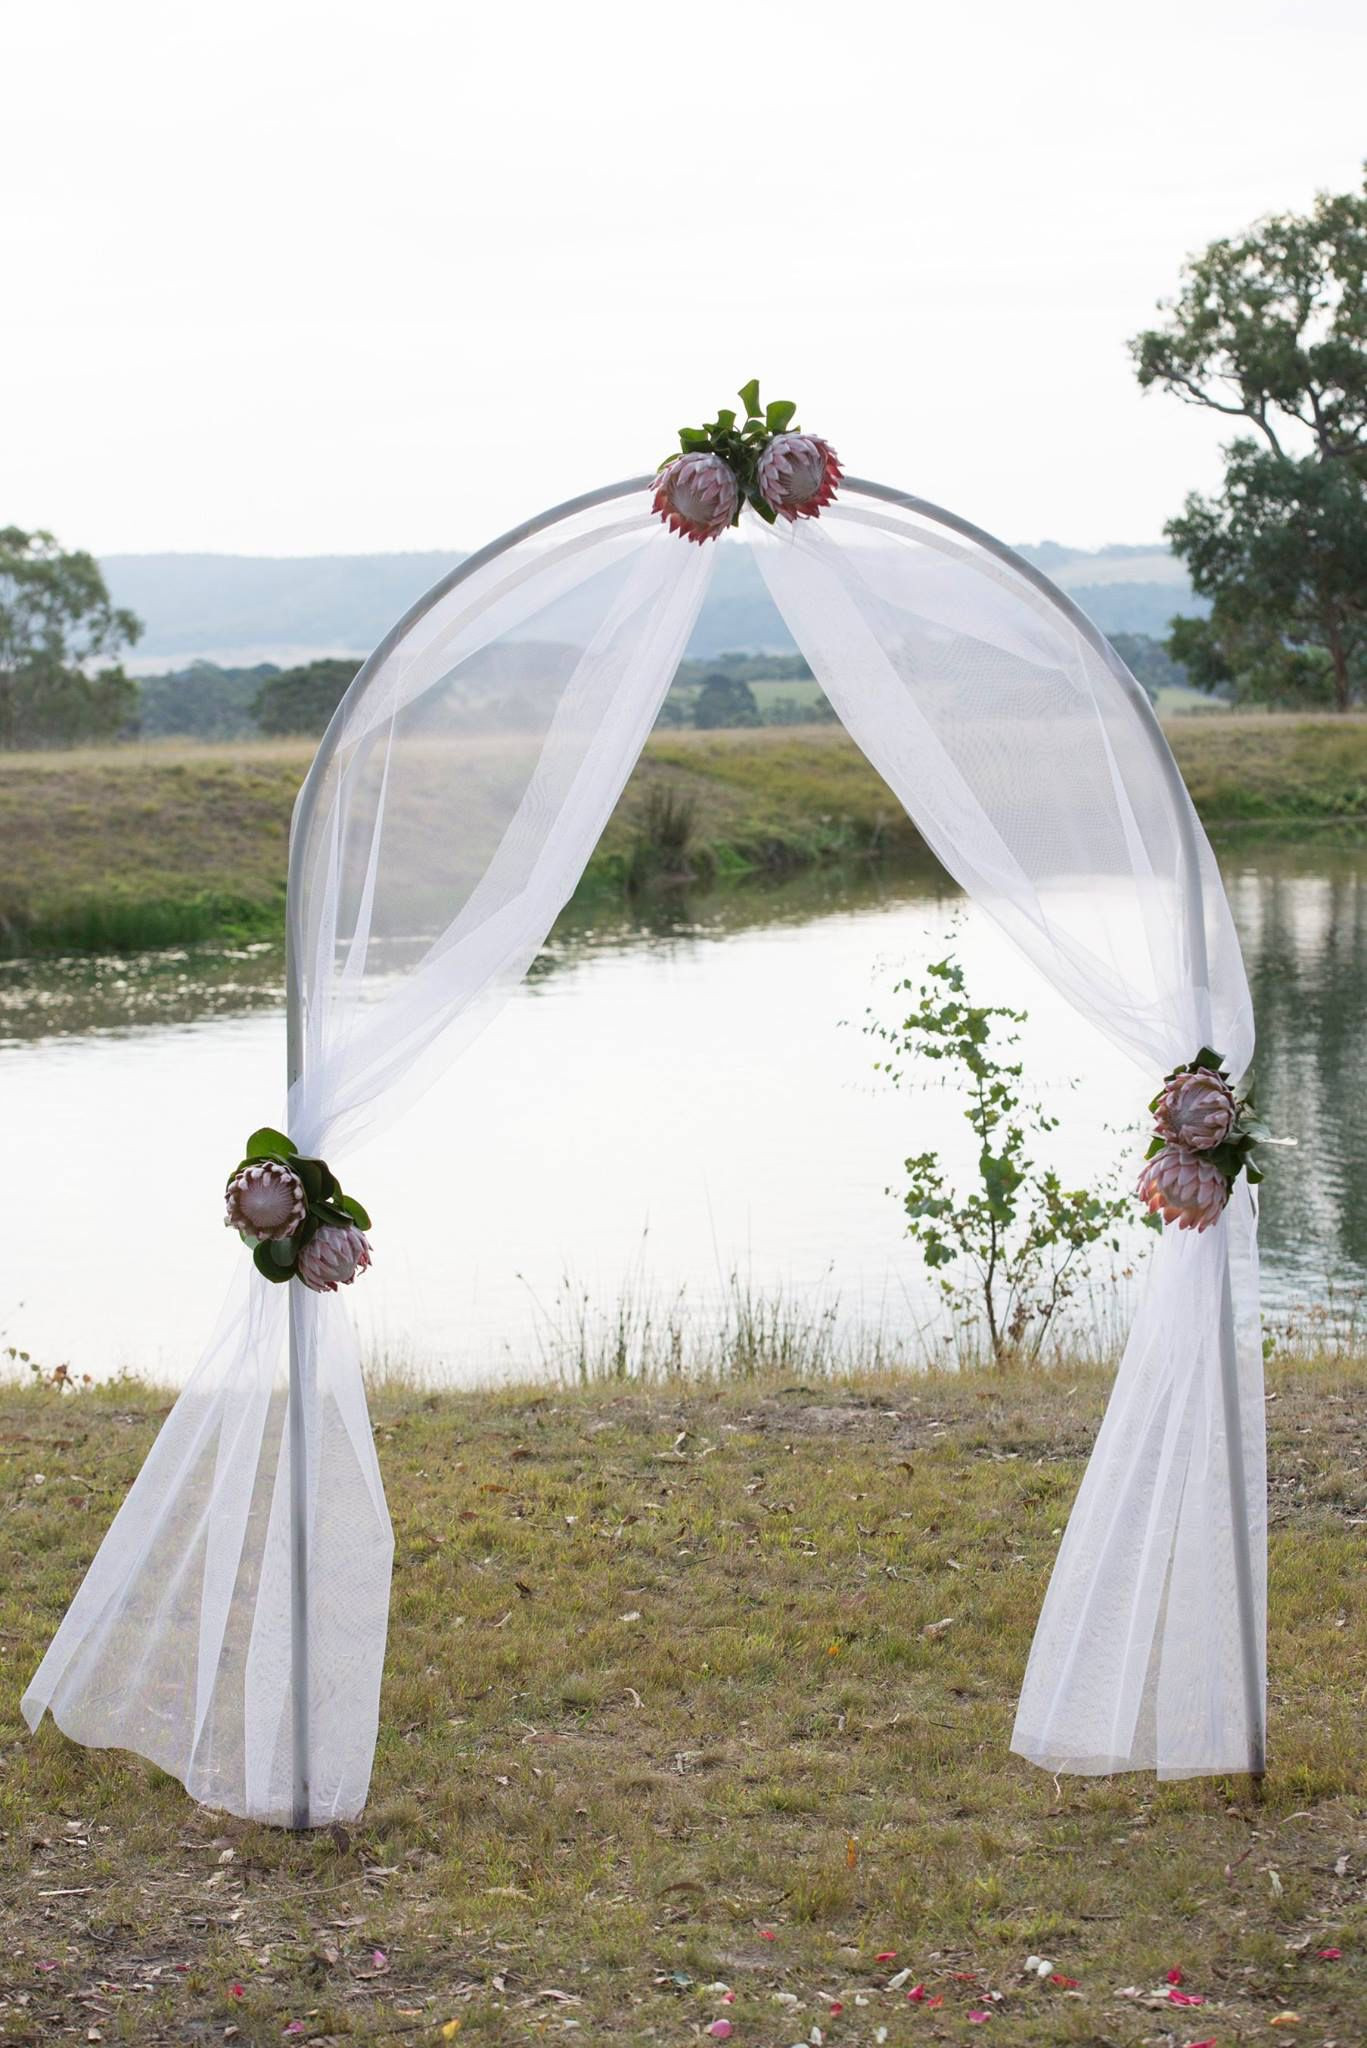 How To Decorate A Wedding Arch
 Gorgeous ceremony Arch decorated with tulle and King